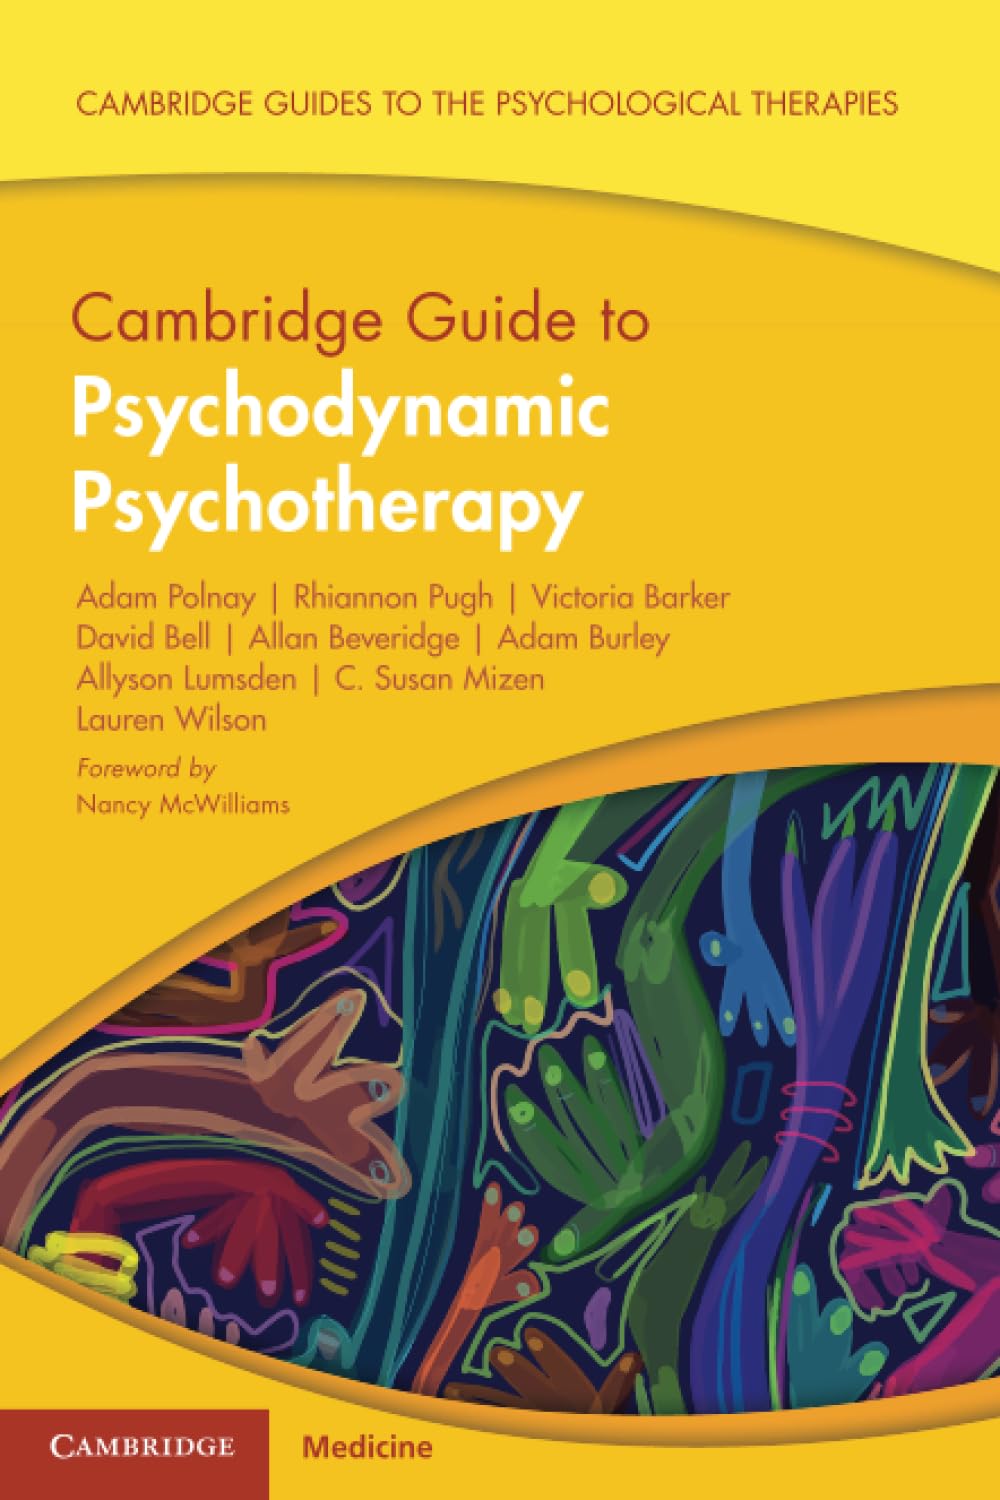 Cambridge Guide to Psychodynamic Psychotherapy (Cambridge Guides to the Psychological Therapies) 1st Edition by  Adam Polnay